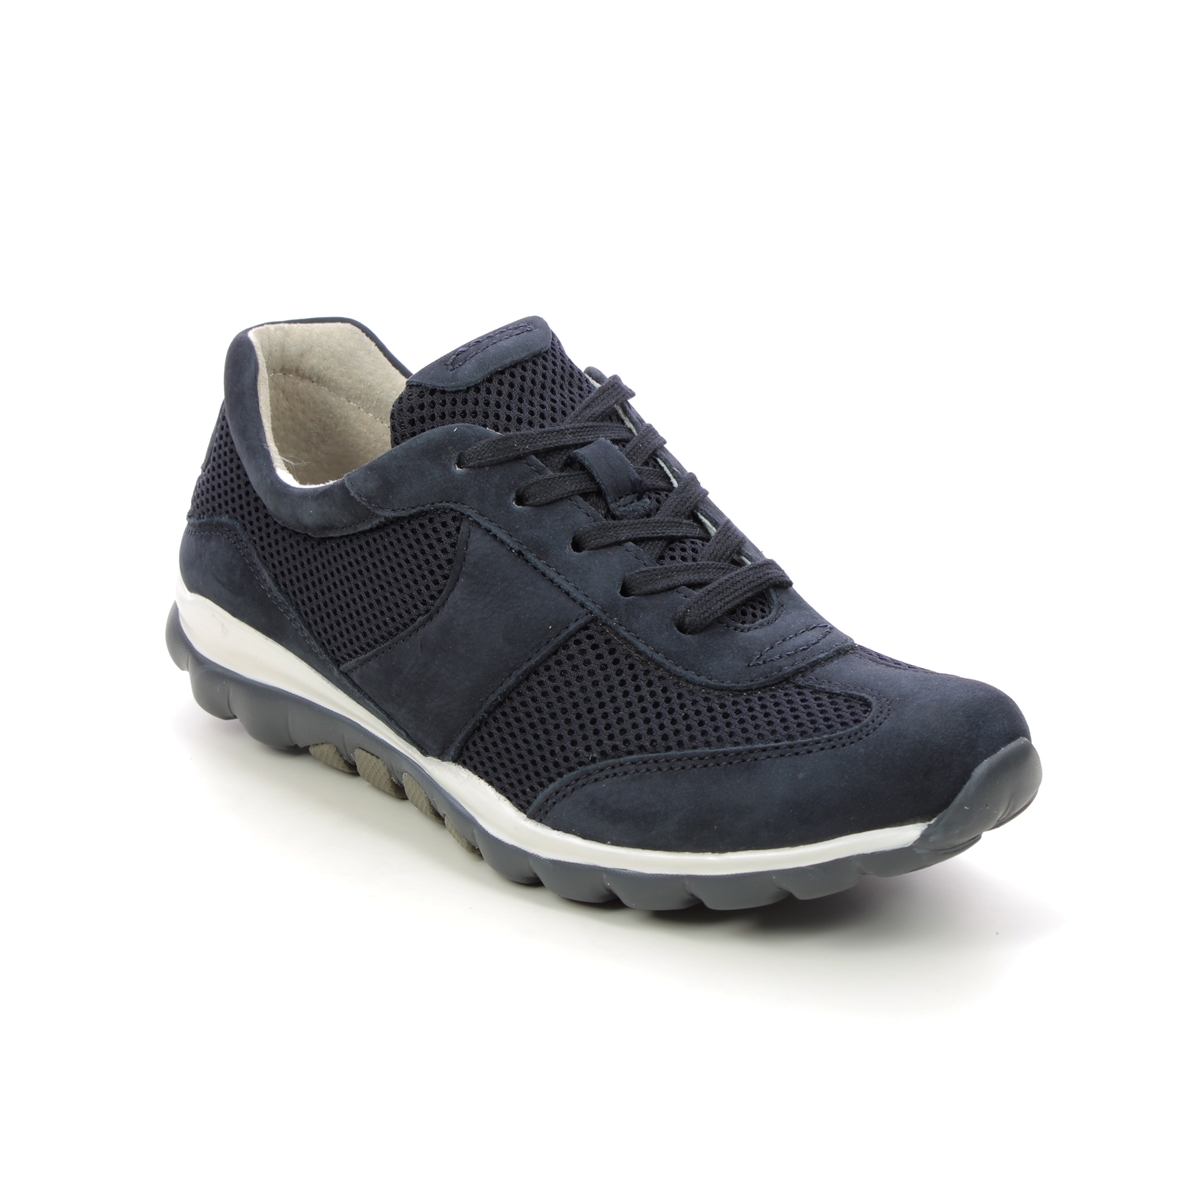 Gabor Helen Navy Nubuck Womens trainers 06.966.46 in a Plain Leather in Size 4